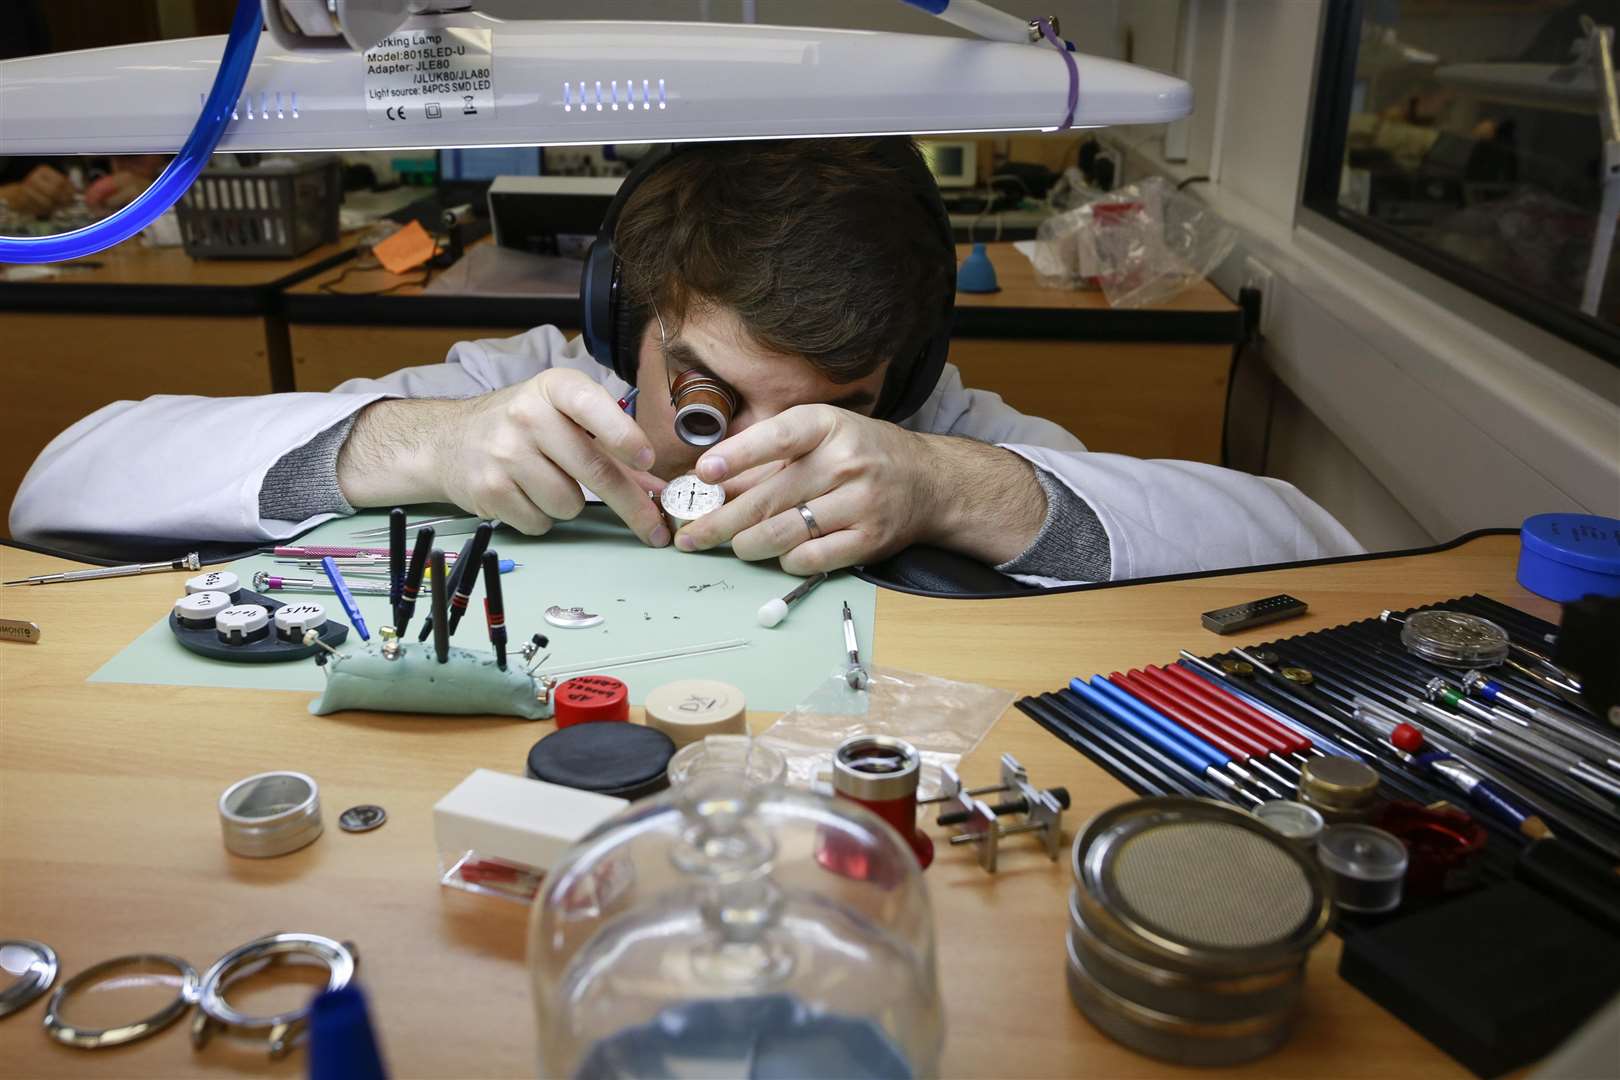 Watchfinder employs around 200 people with a host of specialists